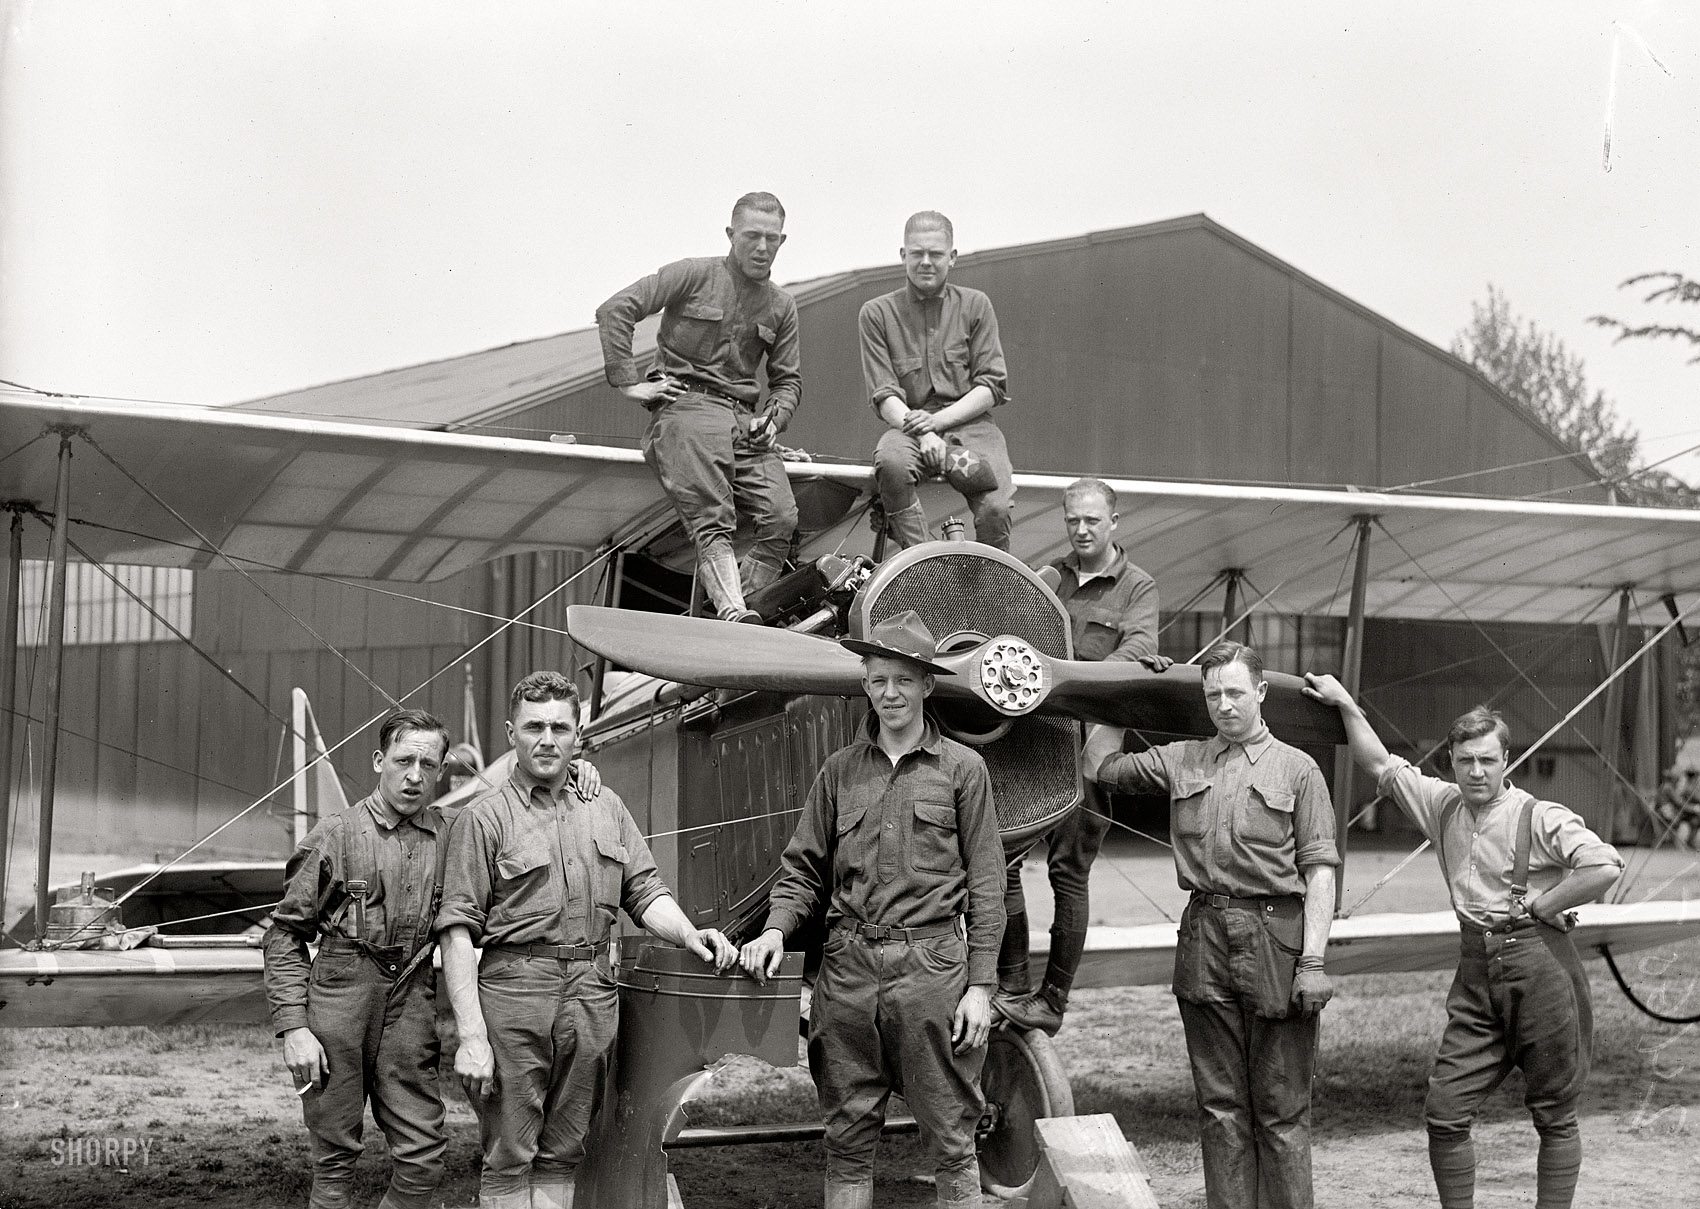 "Inauguration of Aero Mail service. Polo Field mechanics." On May 15, 1918, "America's first aerial mail service was put into operation when aeroplanes piloted by Army aviators carried consignments of mail from New York and Philadelphia to Washington, and from Philadelphia to New York." View full size.